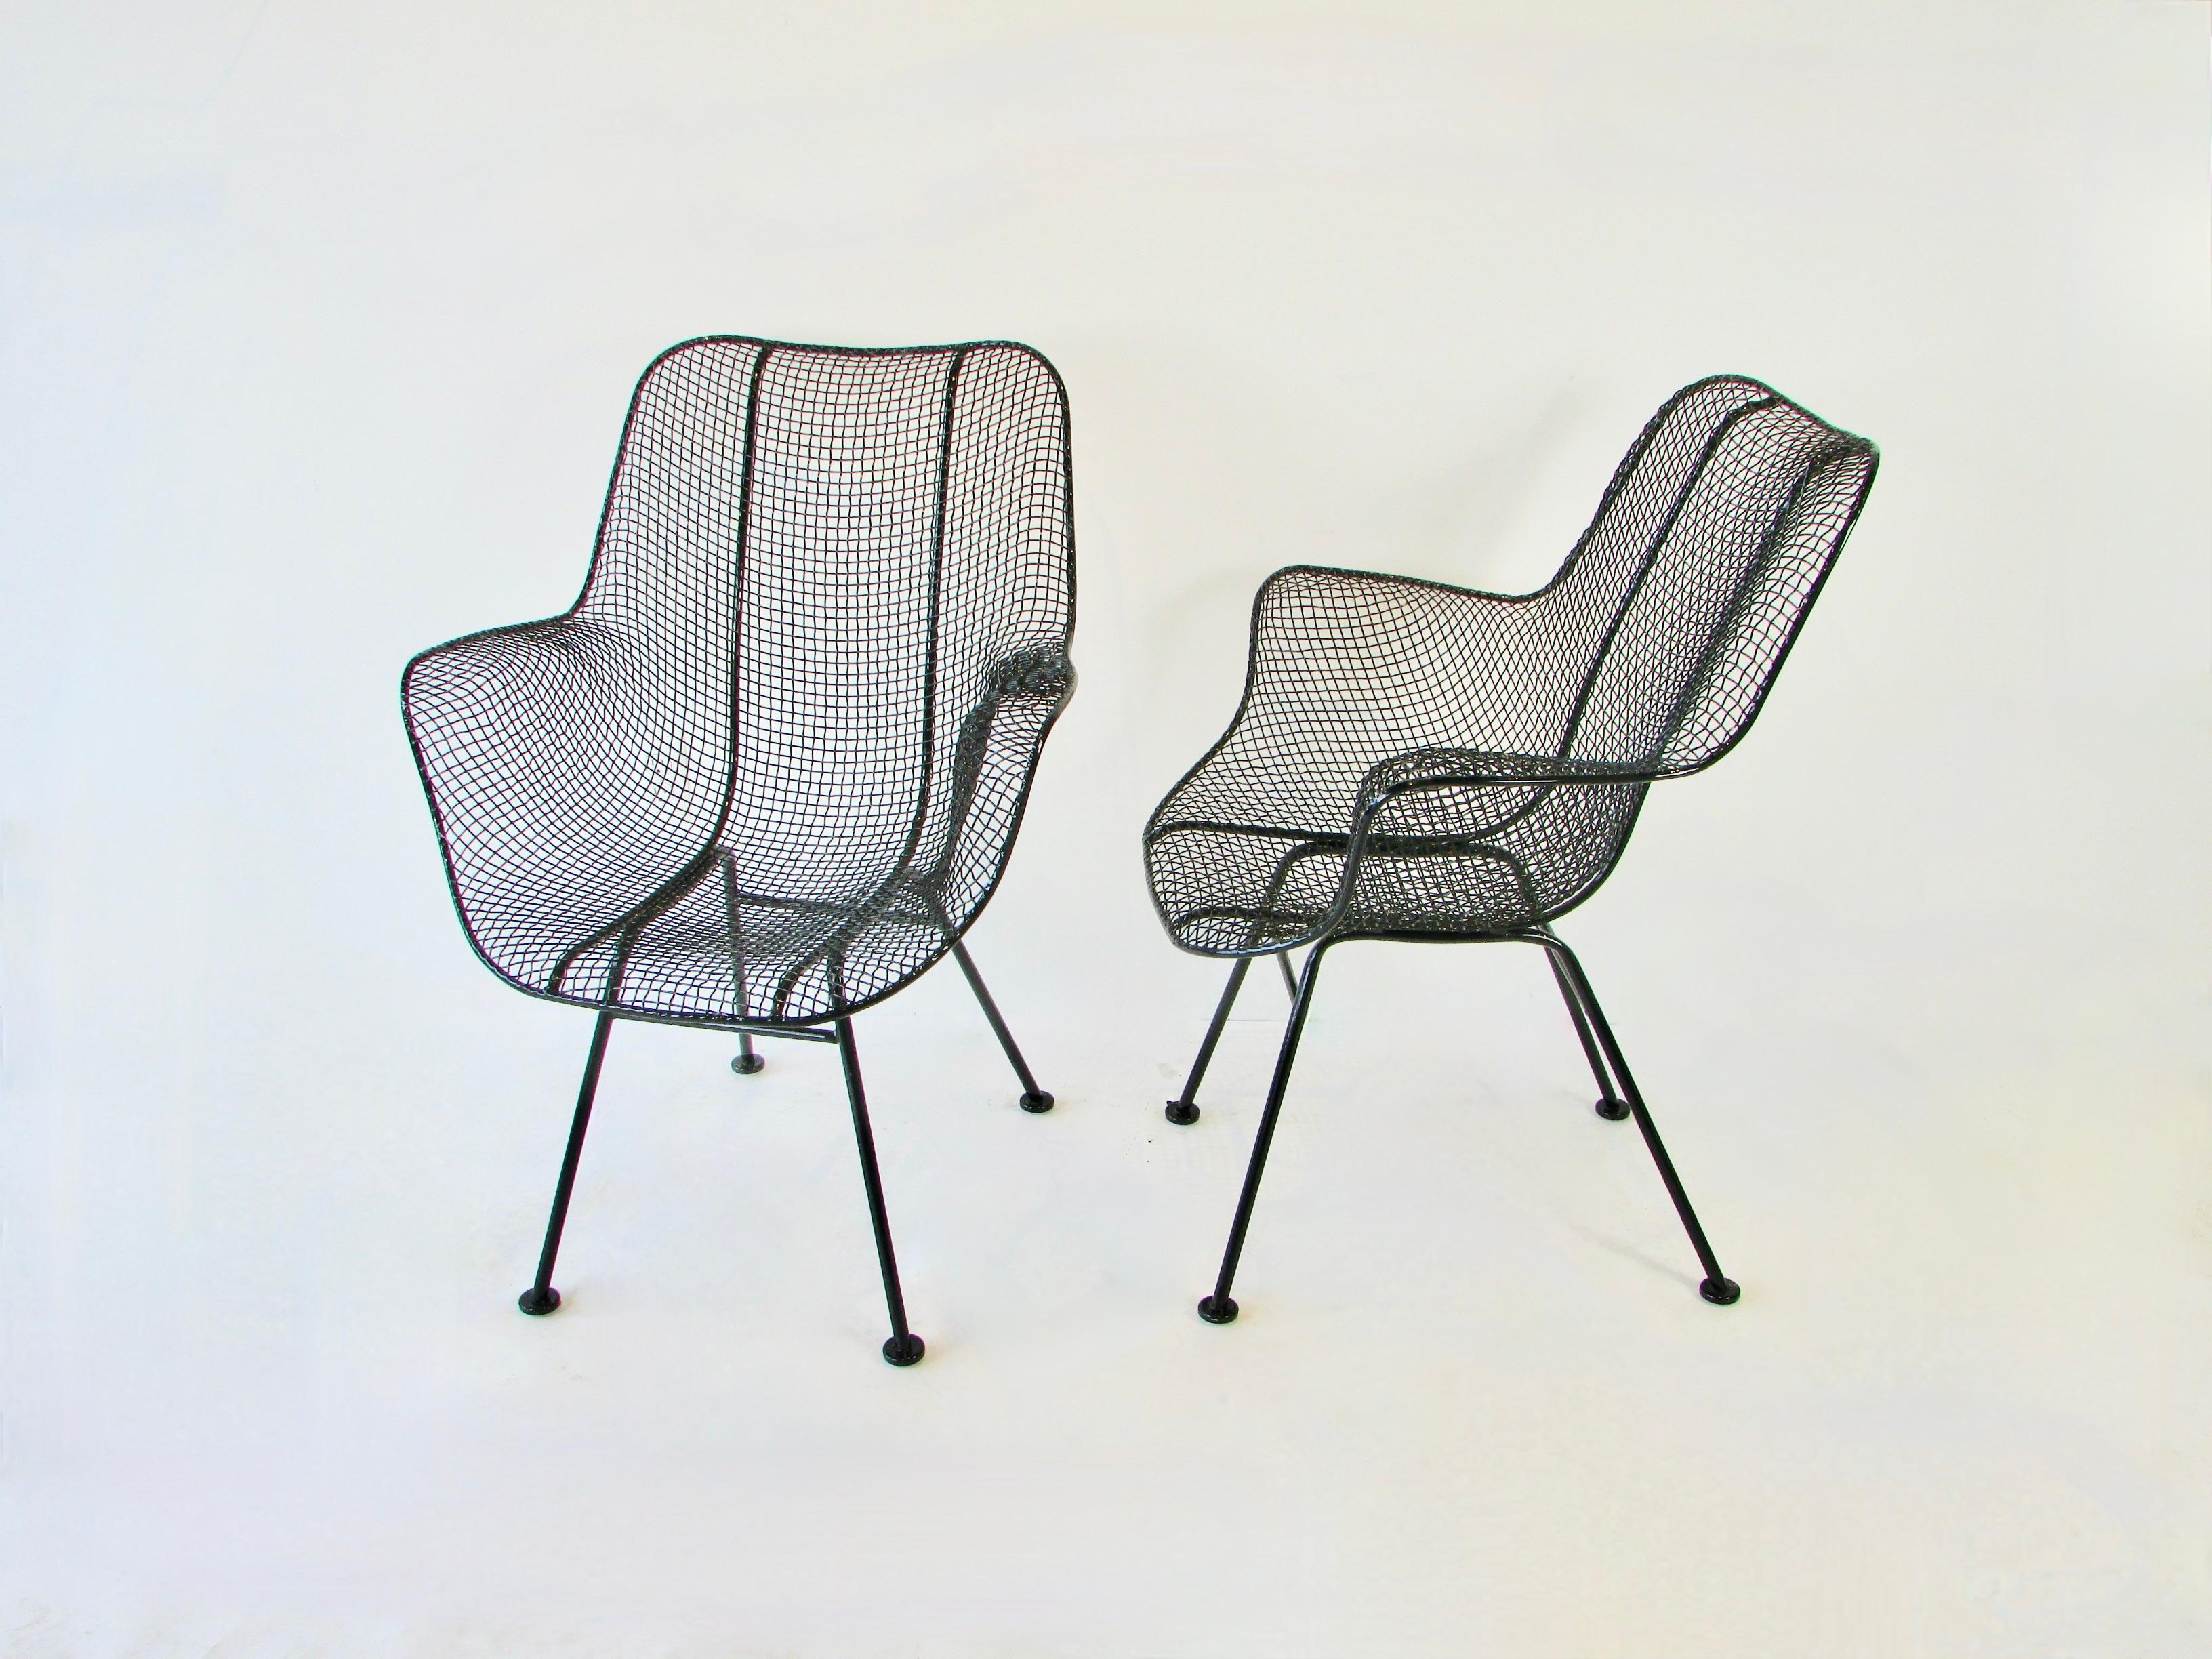 Pair of Woodard high back chairs from the sculptura series. Both chairs cleaned and powder coated in gloss black. New glides added to all feet.